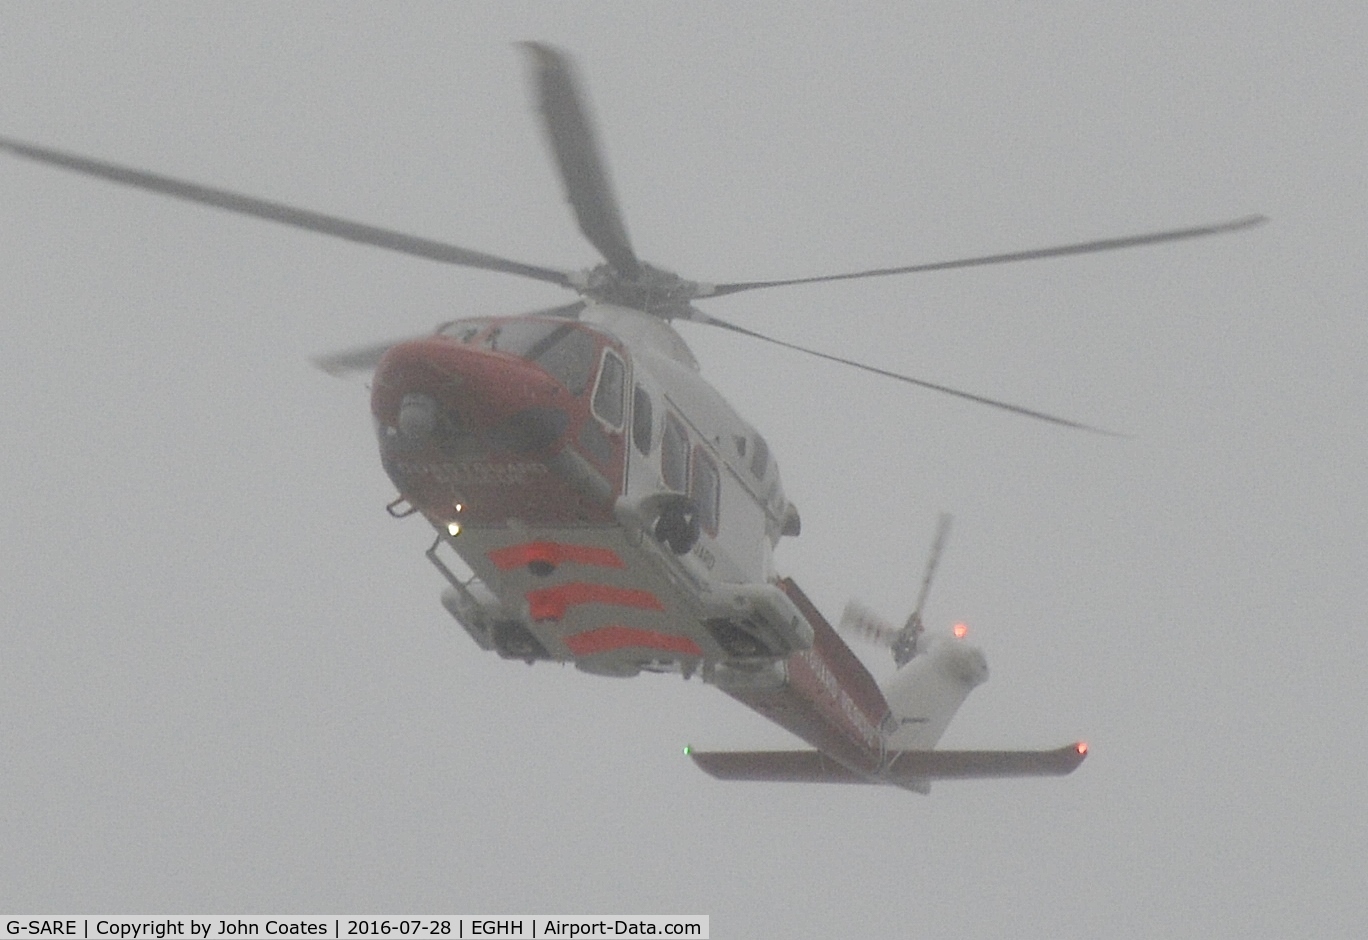 G-SARE, 2015 AgustaWestland AW-139 C/N 31610, Just visible during a low pass in very low cloud